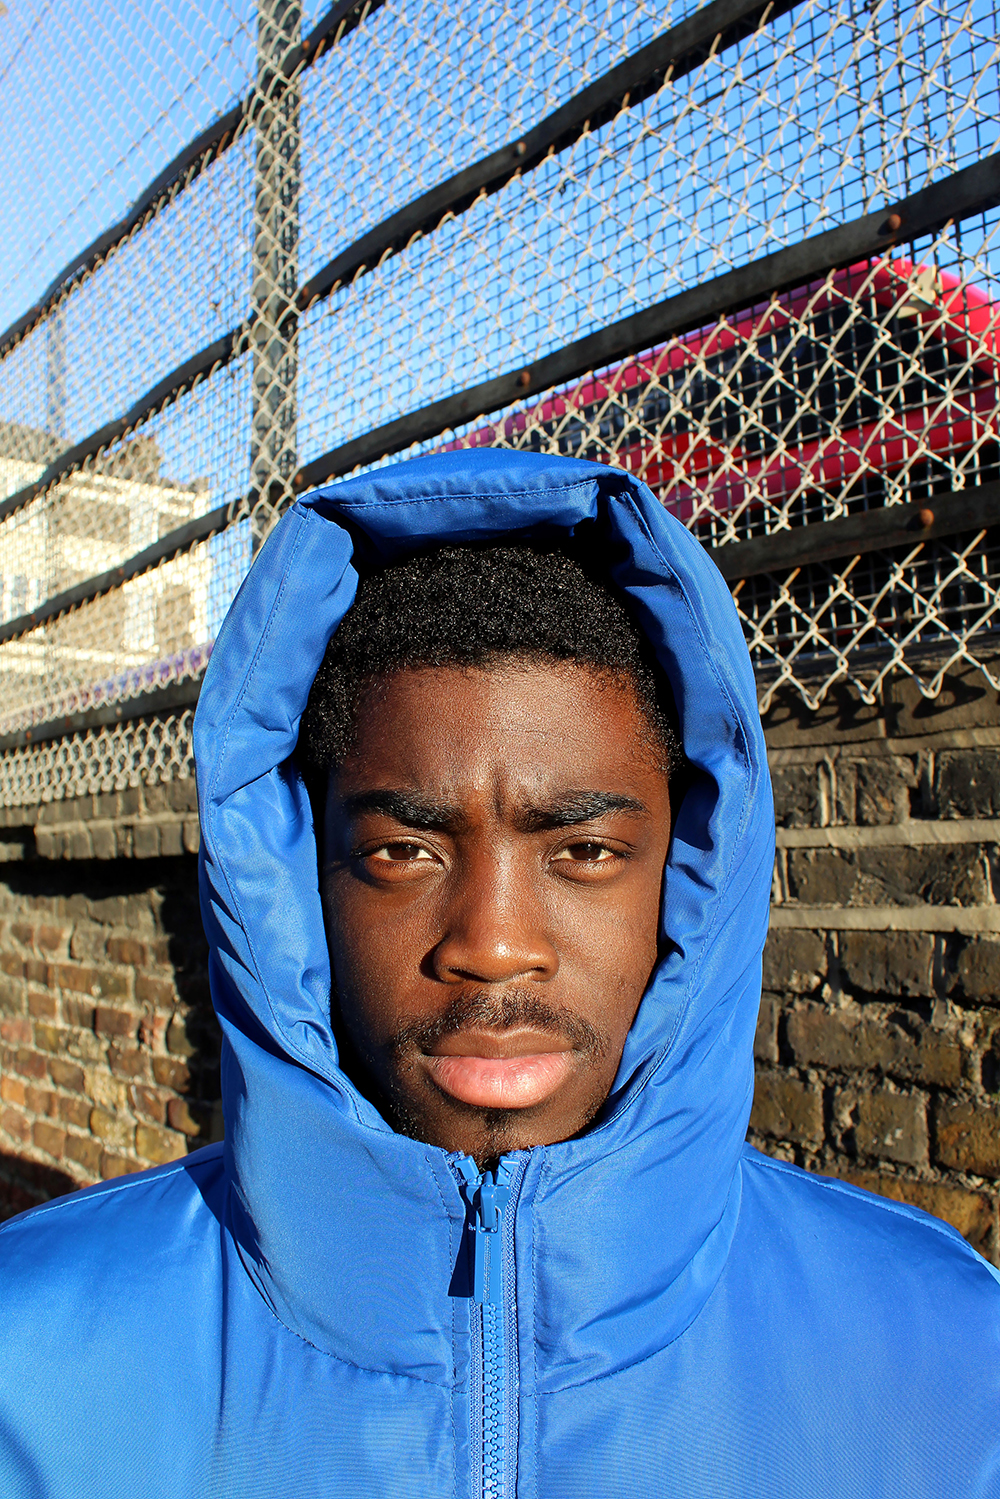 Fashion Portrait of model in blue jacket with hood up by Katie Healy exploring Sportswear In British Youth Culture